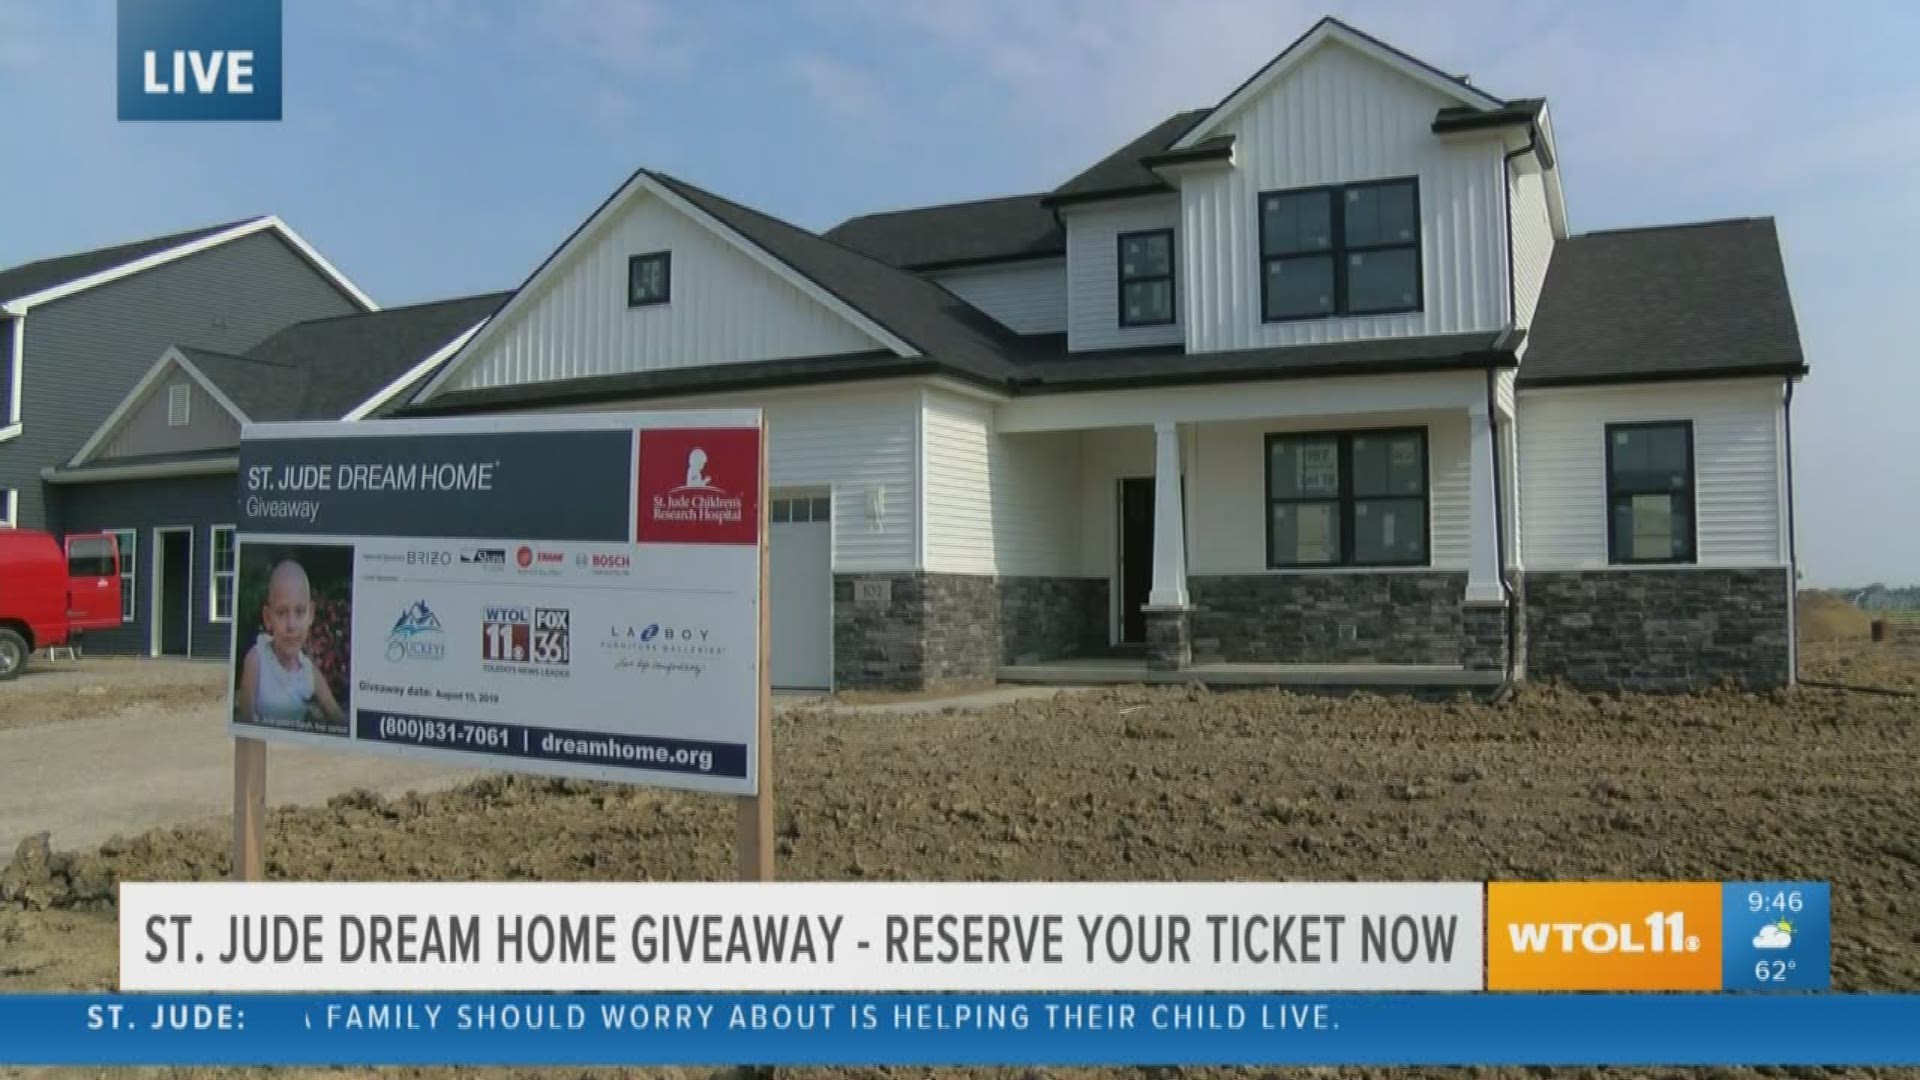 Reserve your ticket for the St. Jude Dream Home Giveaway for a chance to earn other awesome prizes, like a La-Z-Boy shopping spree!